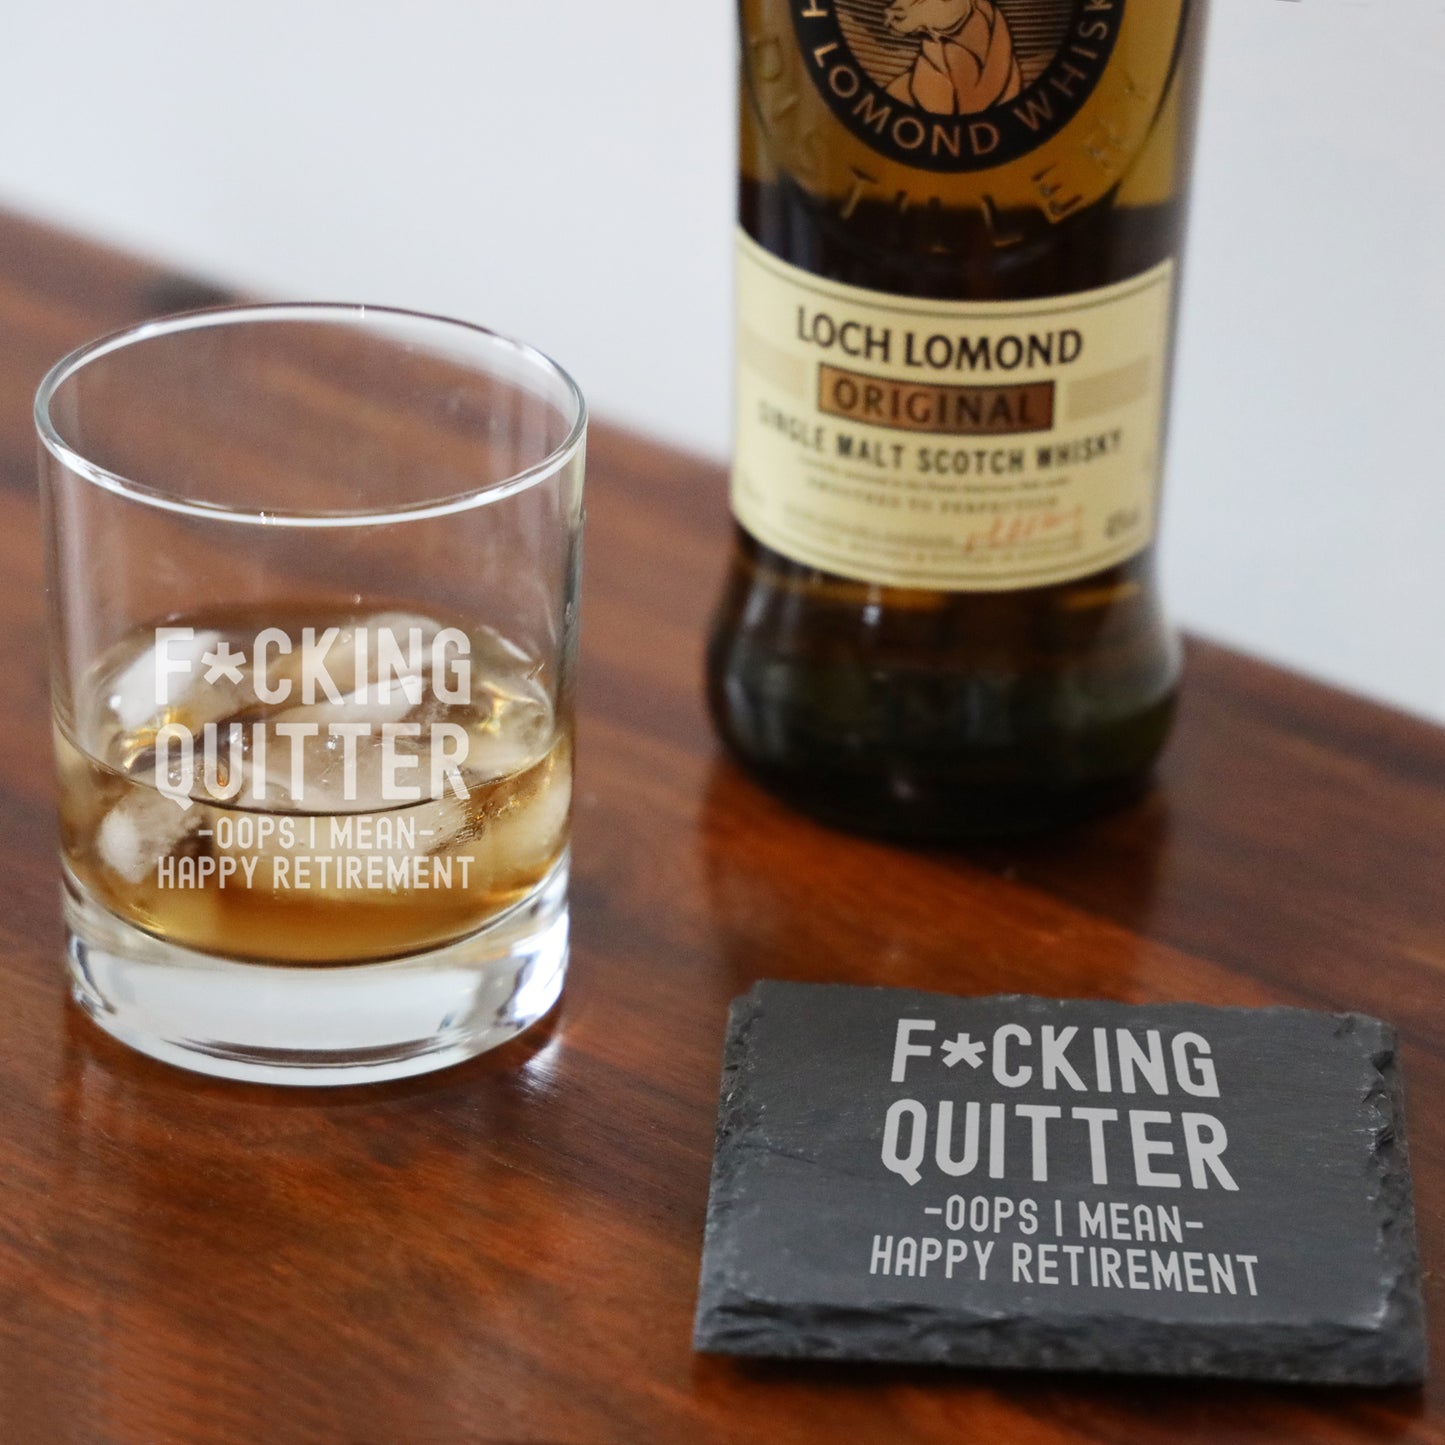 Engraved Funny "F*cking Quitter, Oops I mean Happy Retirement" Whisky Glass and/or Coaster Novelty Gift  - Always Looking Good - Glass & Square Coaster  